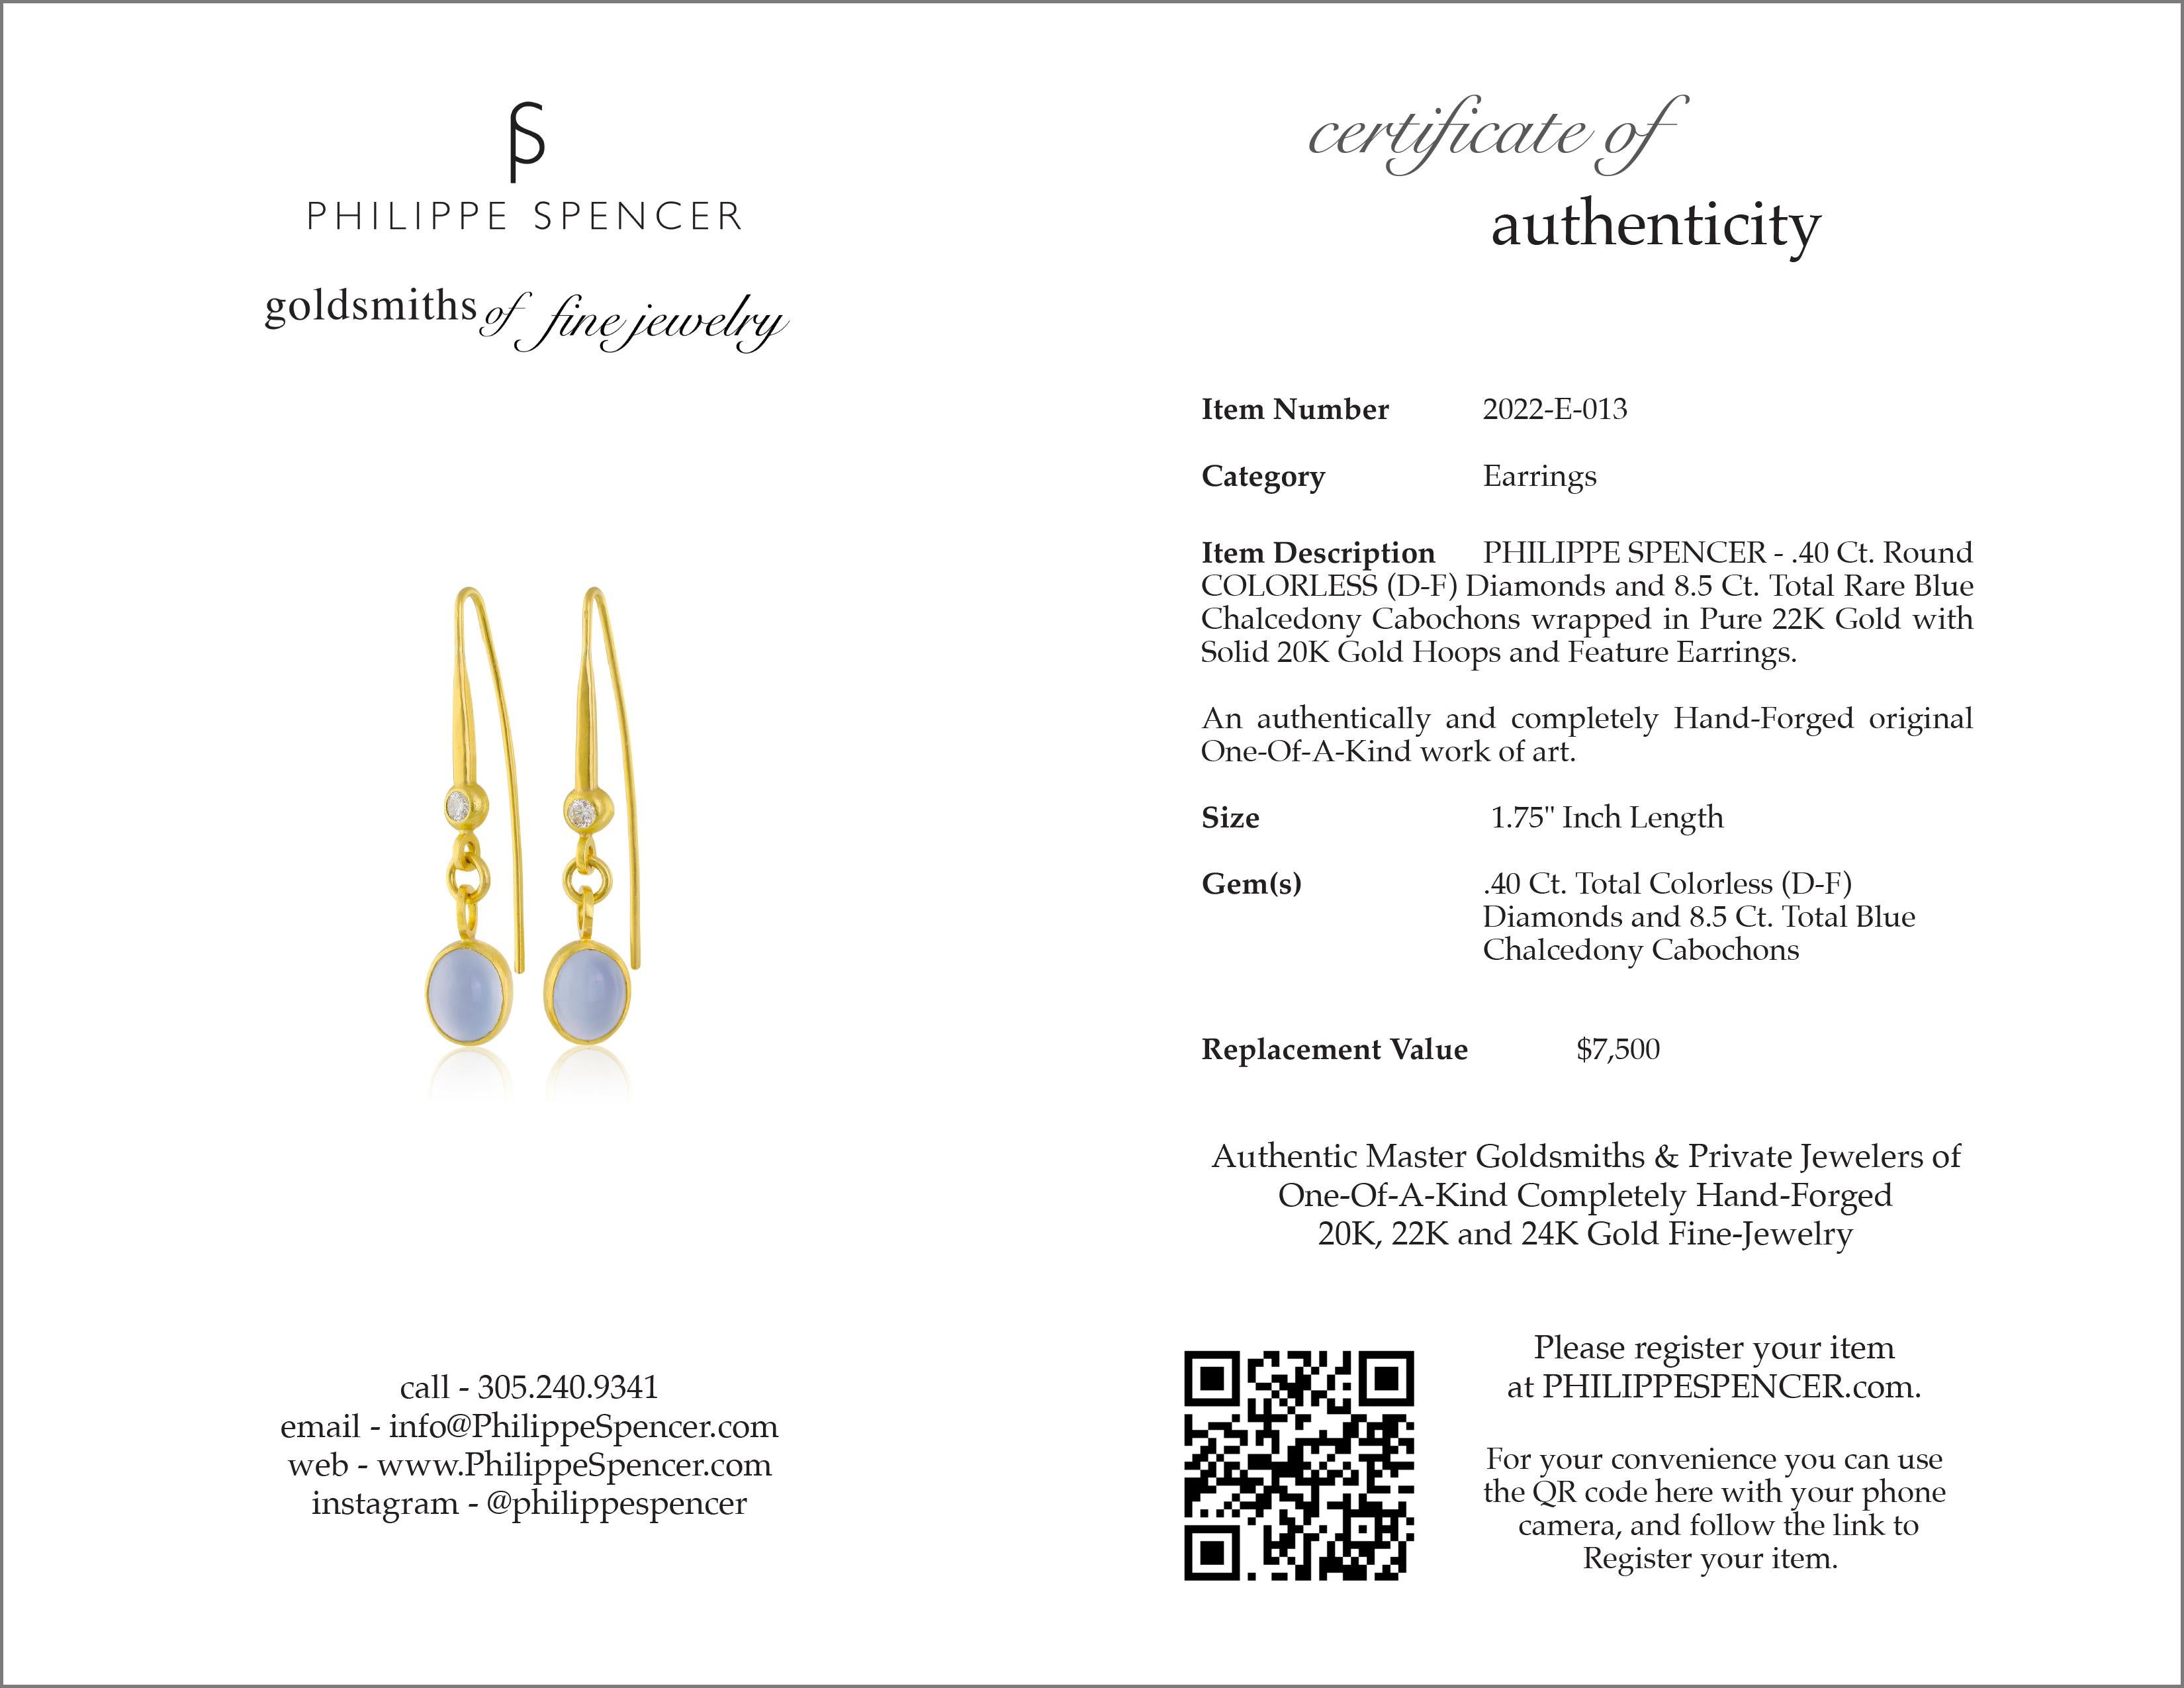 PHILIPPE SPENCER Colorless Diamonds & Chalcedony in 22K & 20K Gold Earrings For Sale 1